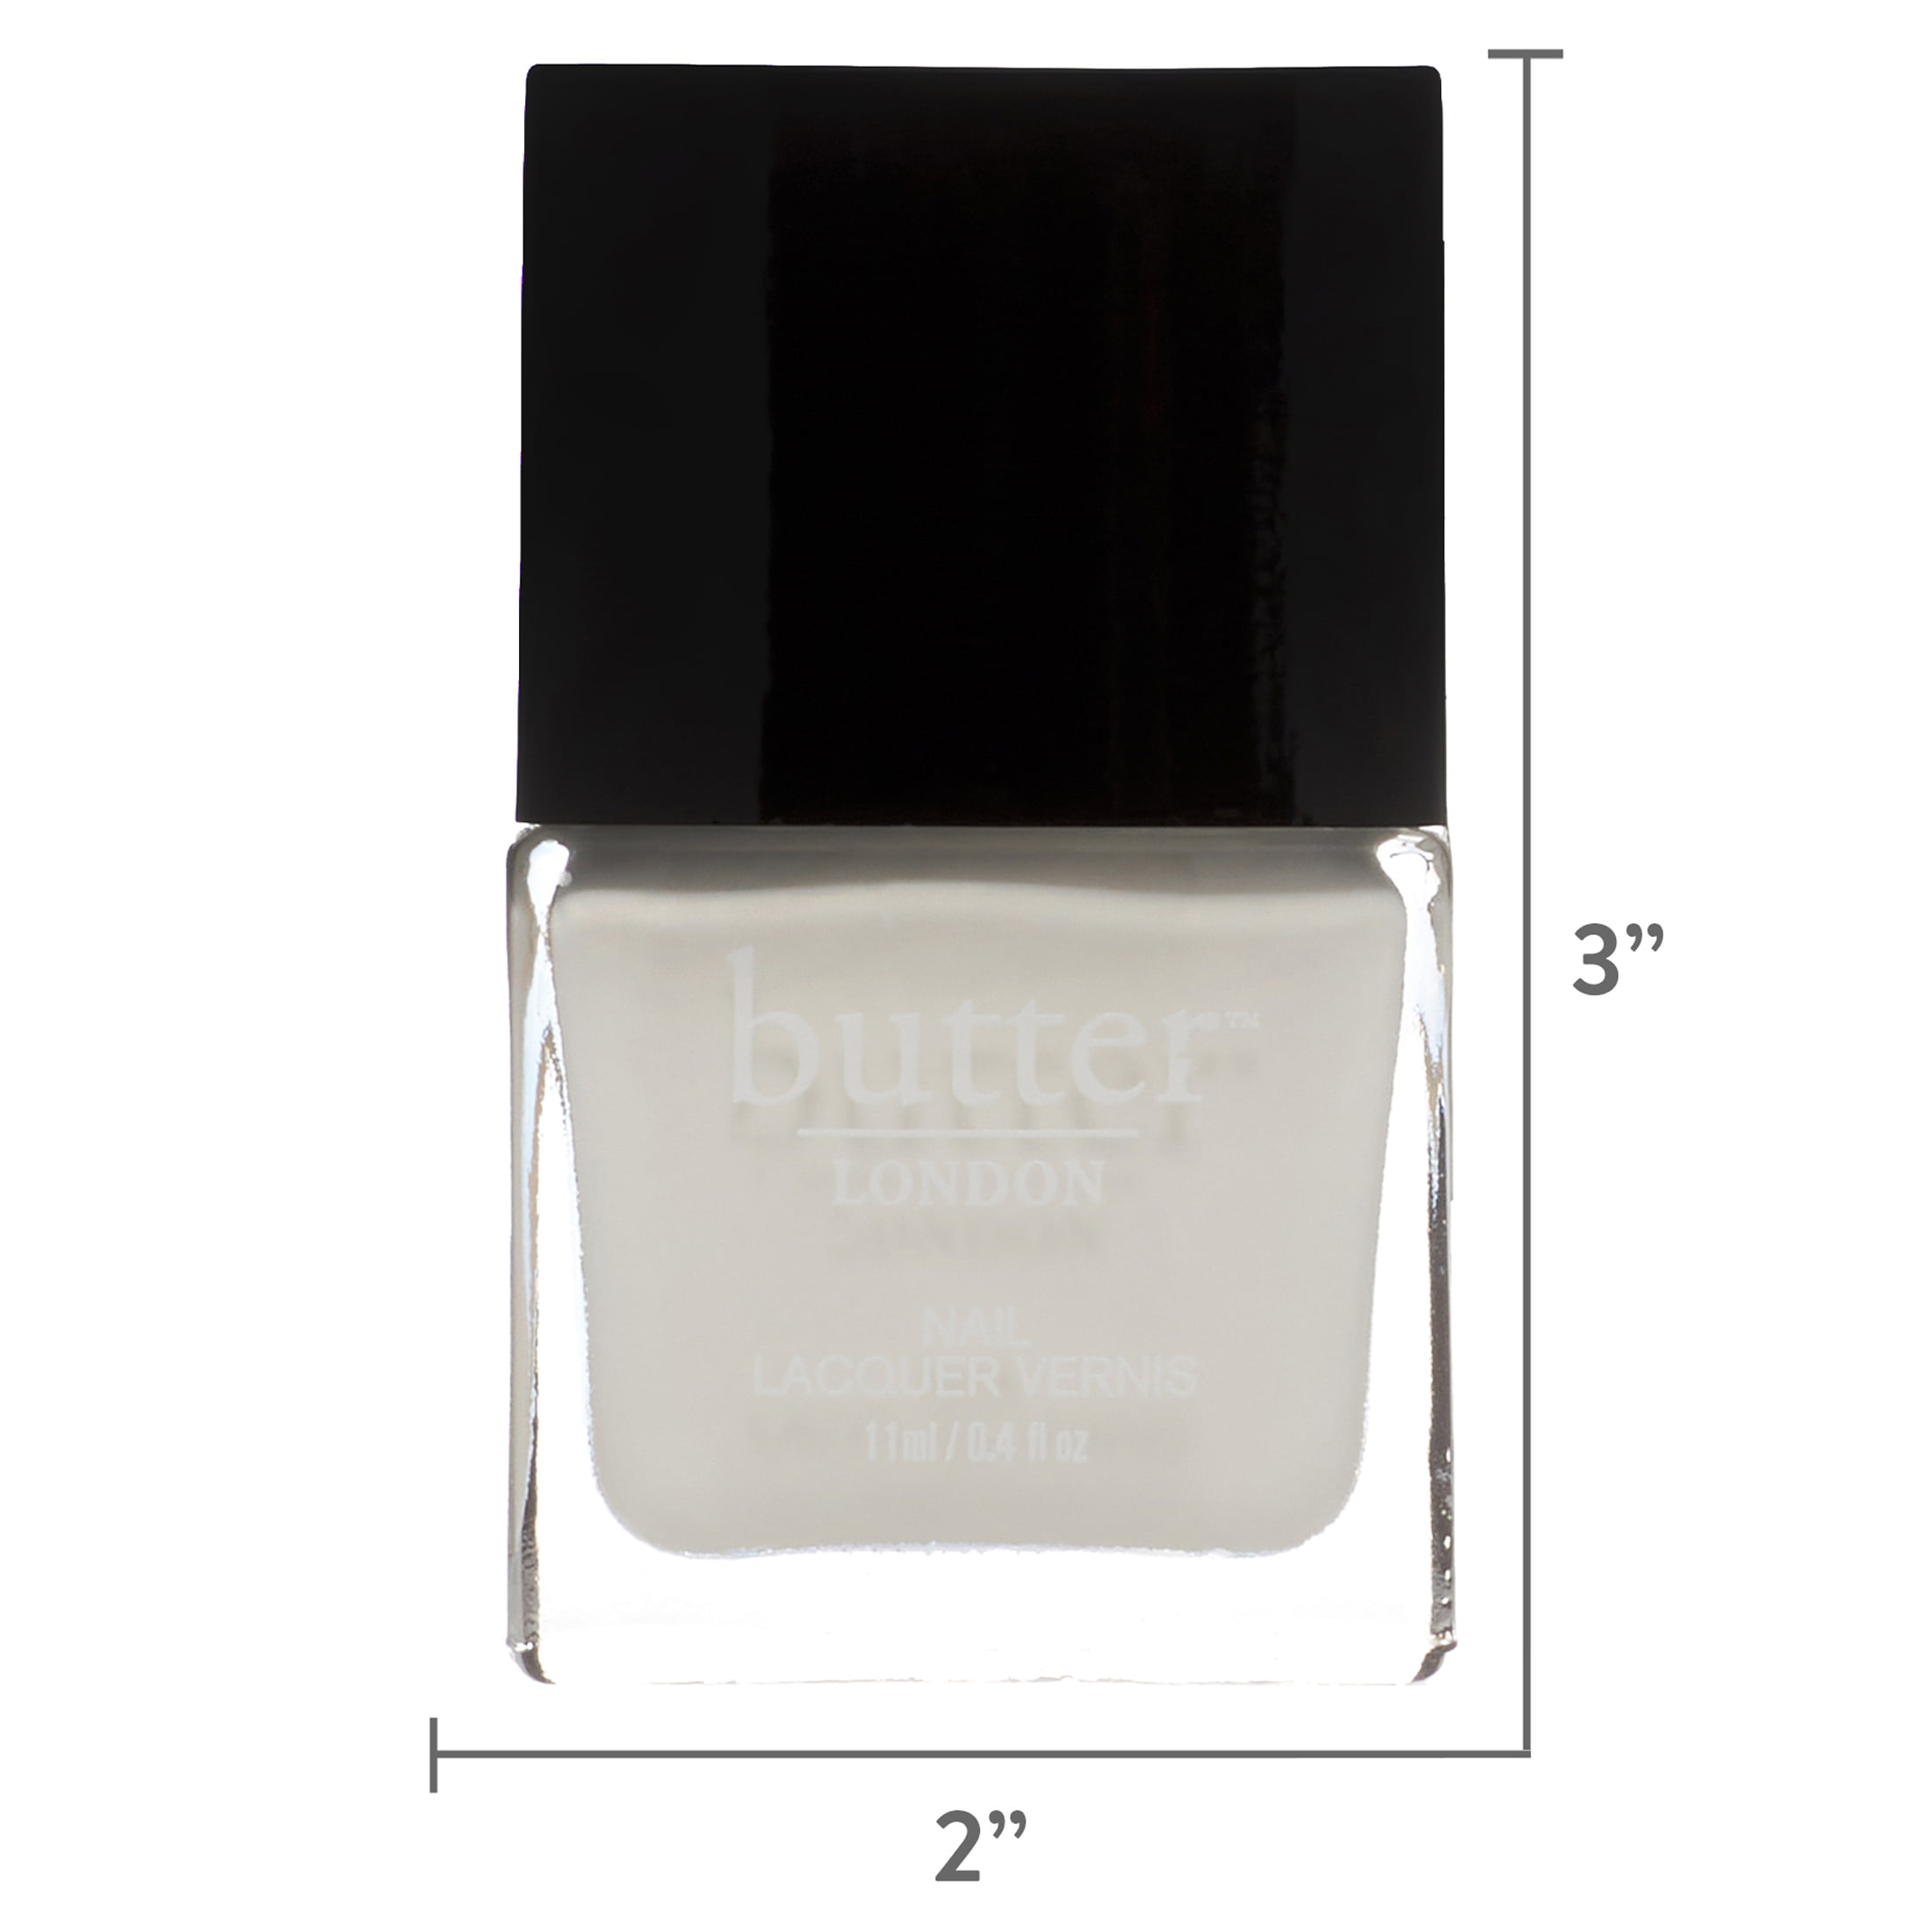 Butter London Patent Shine 10X Nail Lacquer London Fog | Simply Be